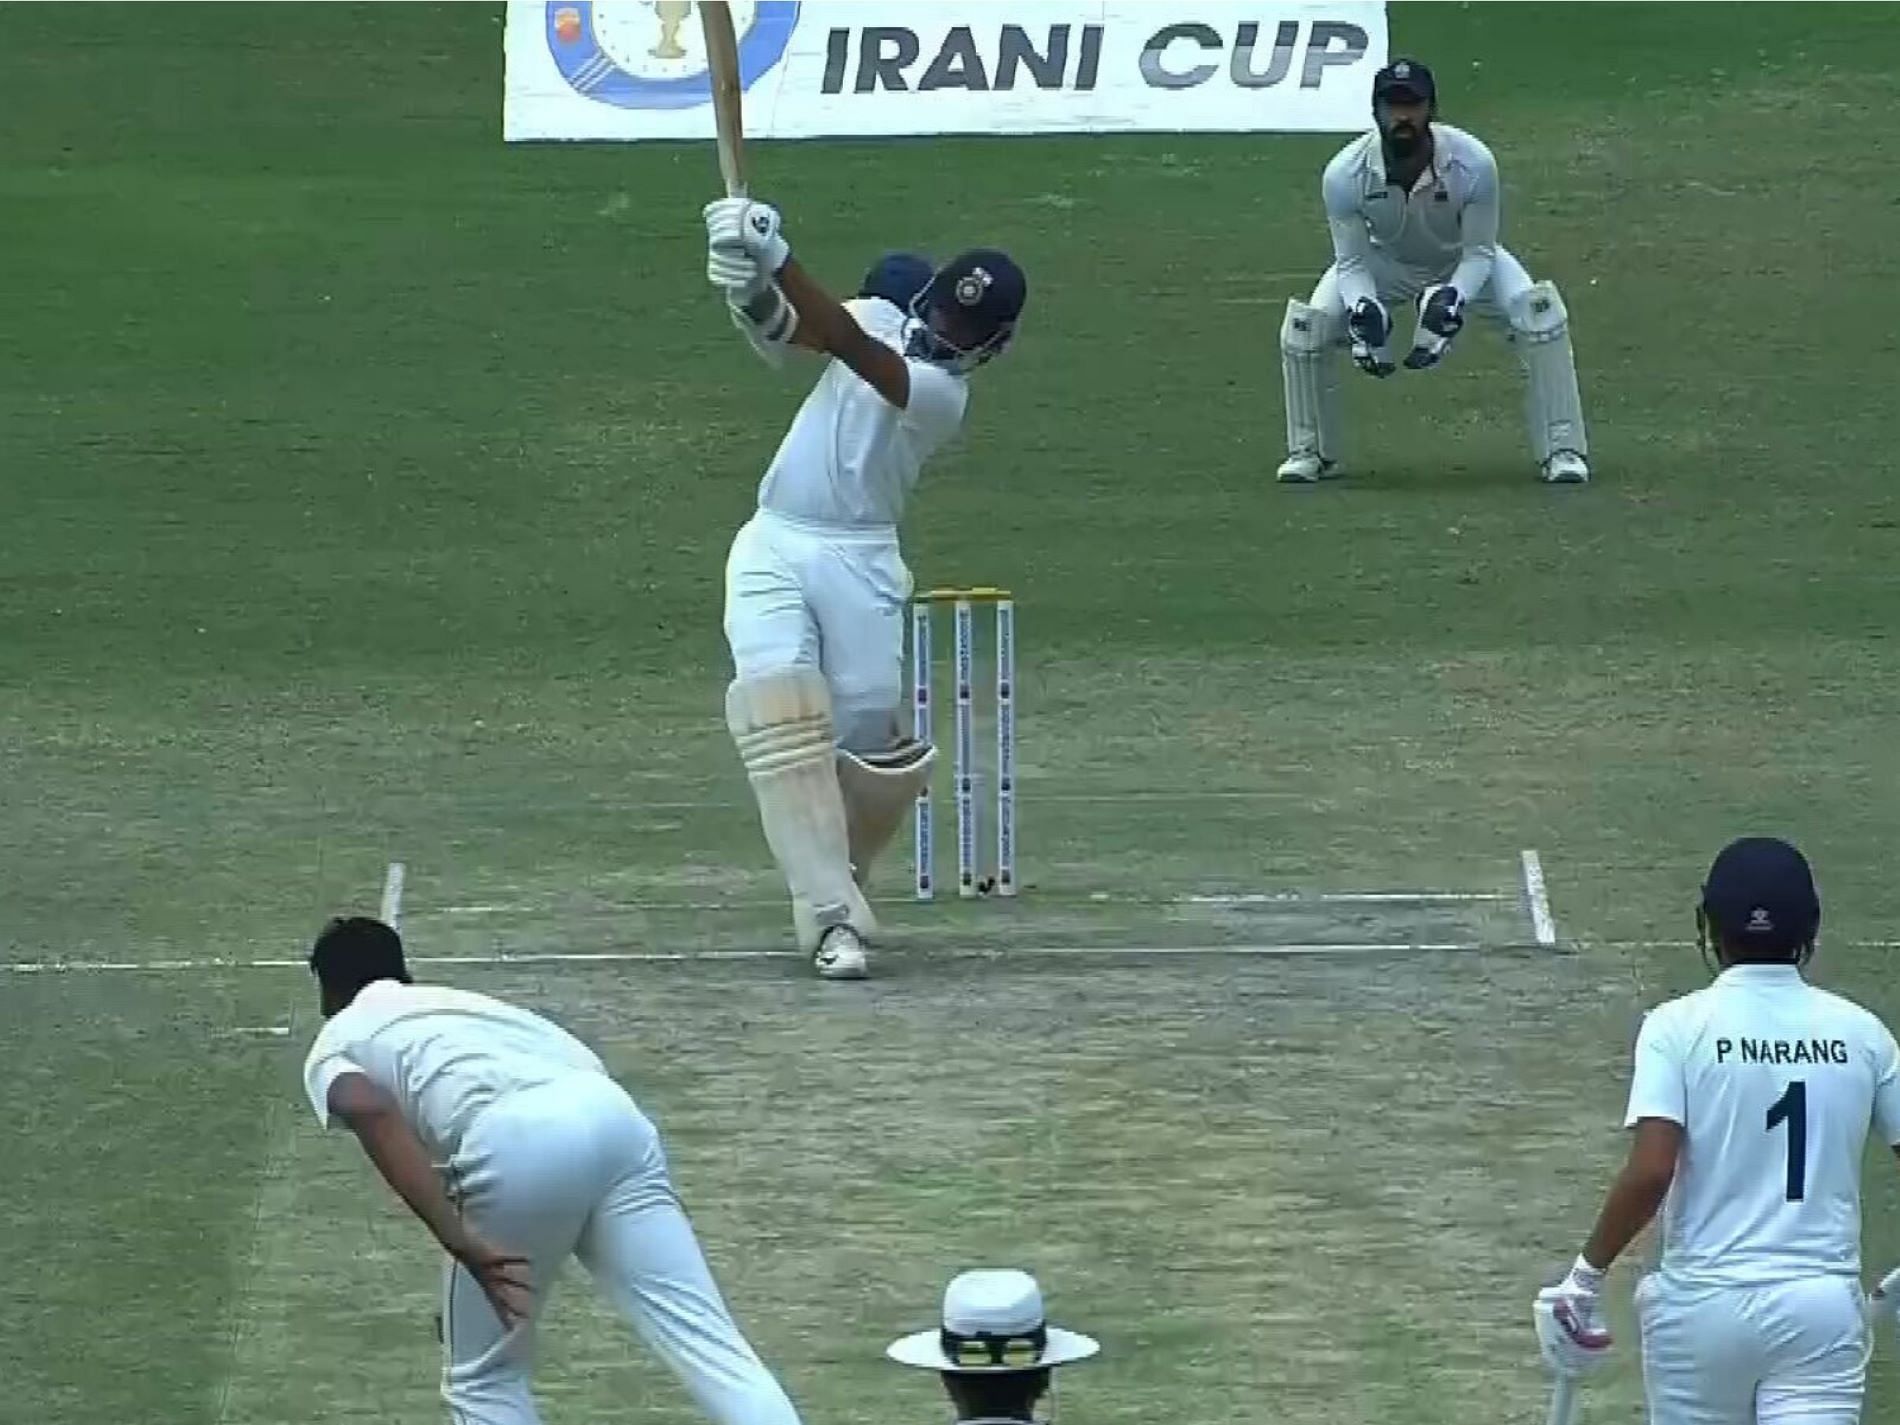 Yashasvi Jaiswal en route to a second innings century in the 2023 Irani Cup.